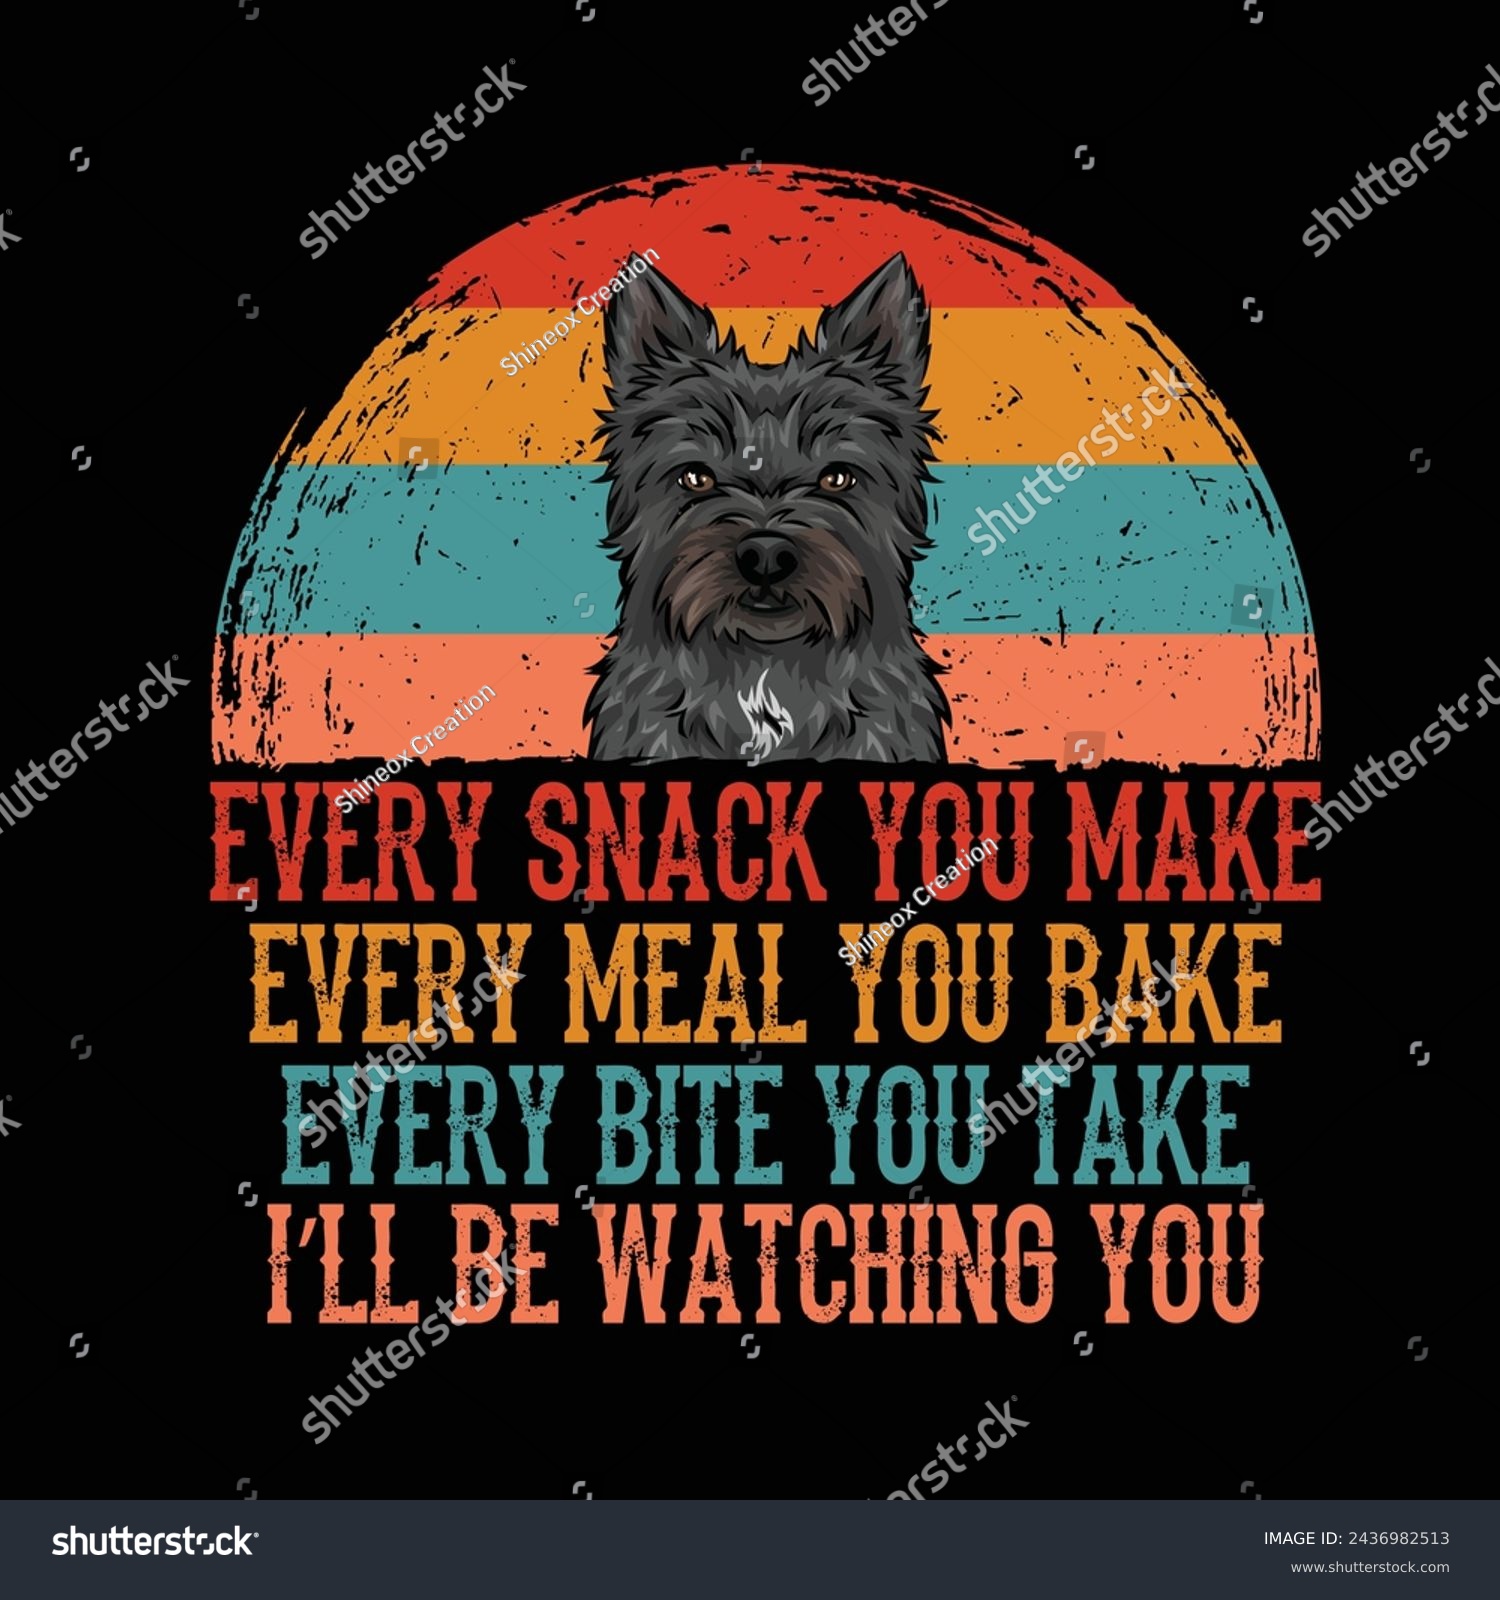 SVG of Every snack you make Every meal you bake Every bite you take I'll Be Watching You Cairn Terrier Dog Typography t-shirt Design Vector svg